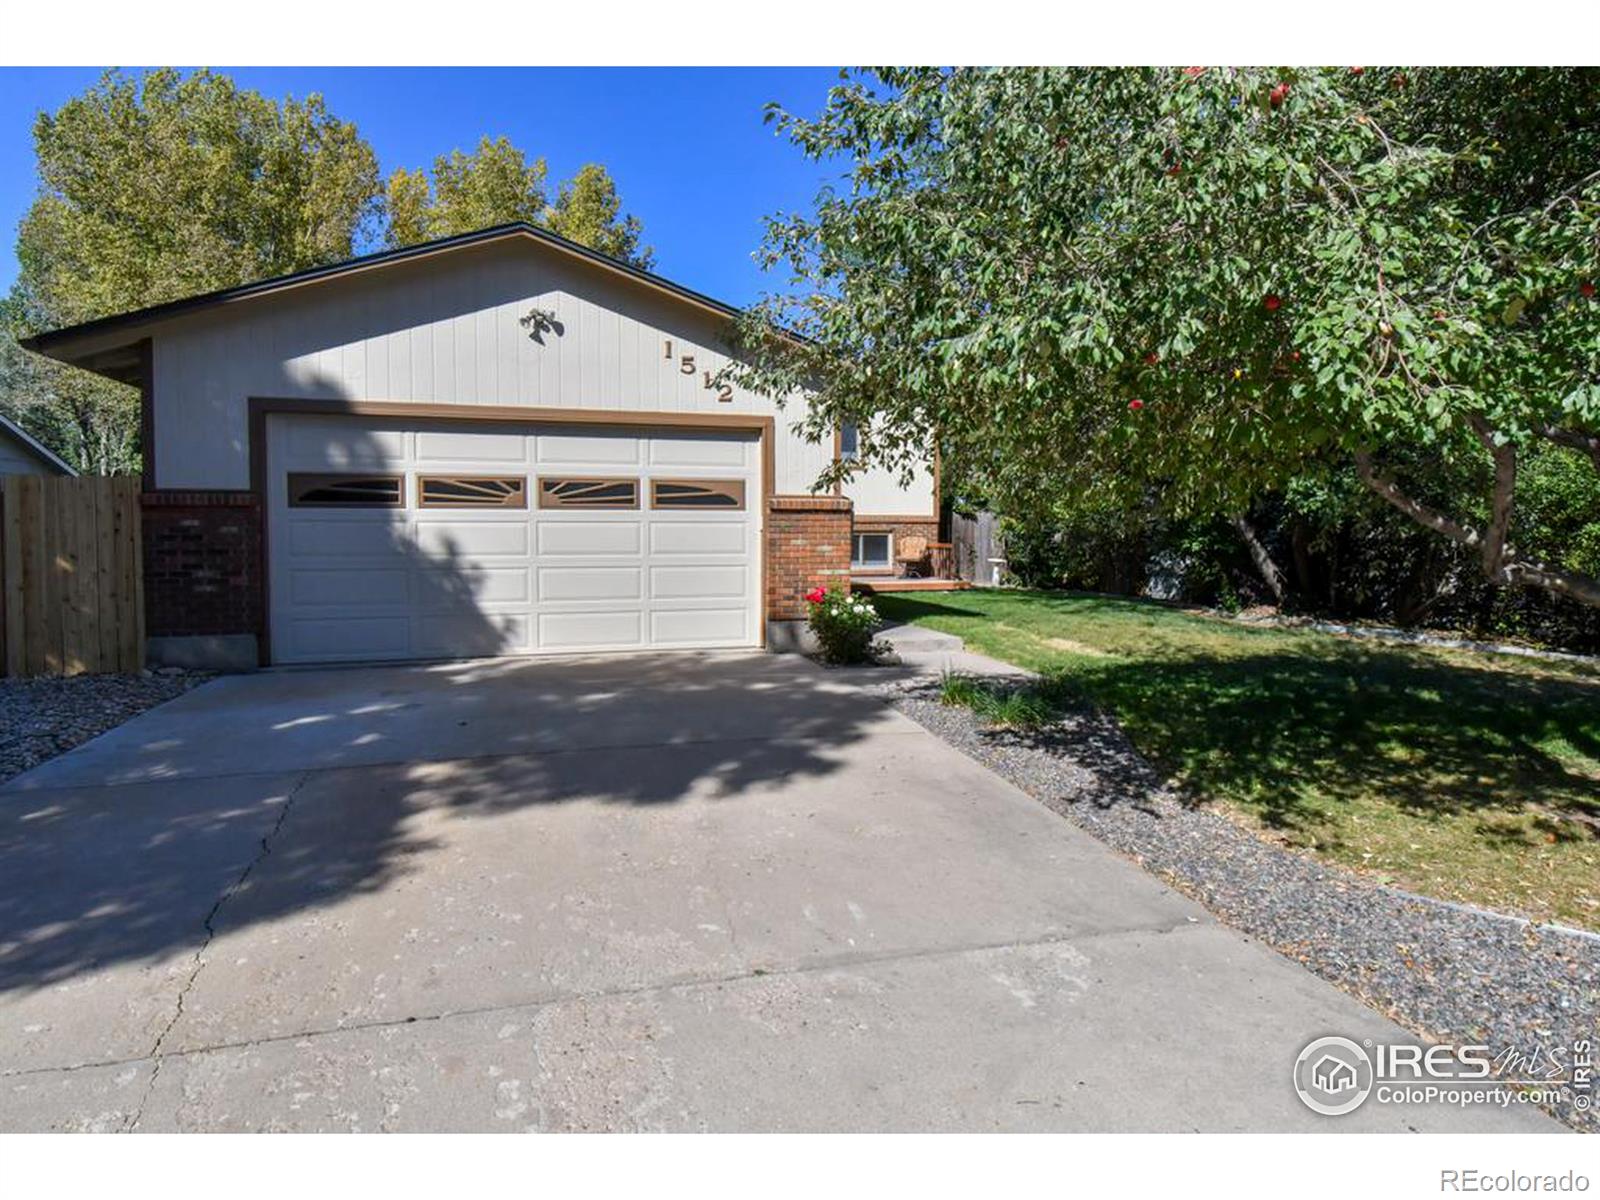 Report Image for 1512  Glen Haven Drive,Fort Collins, Colorado